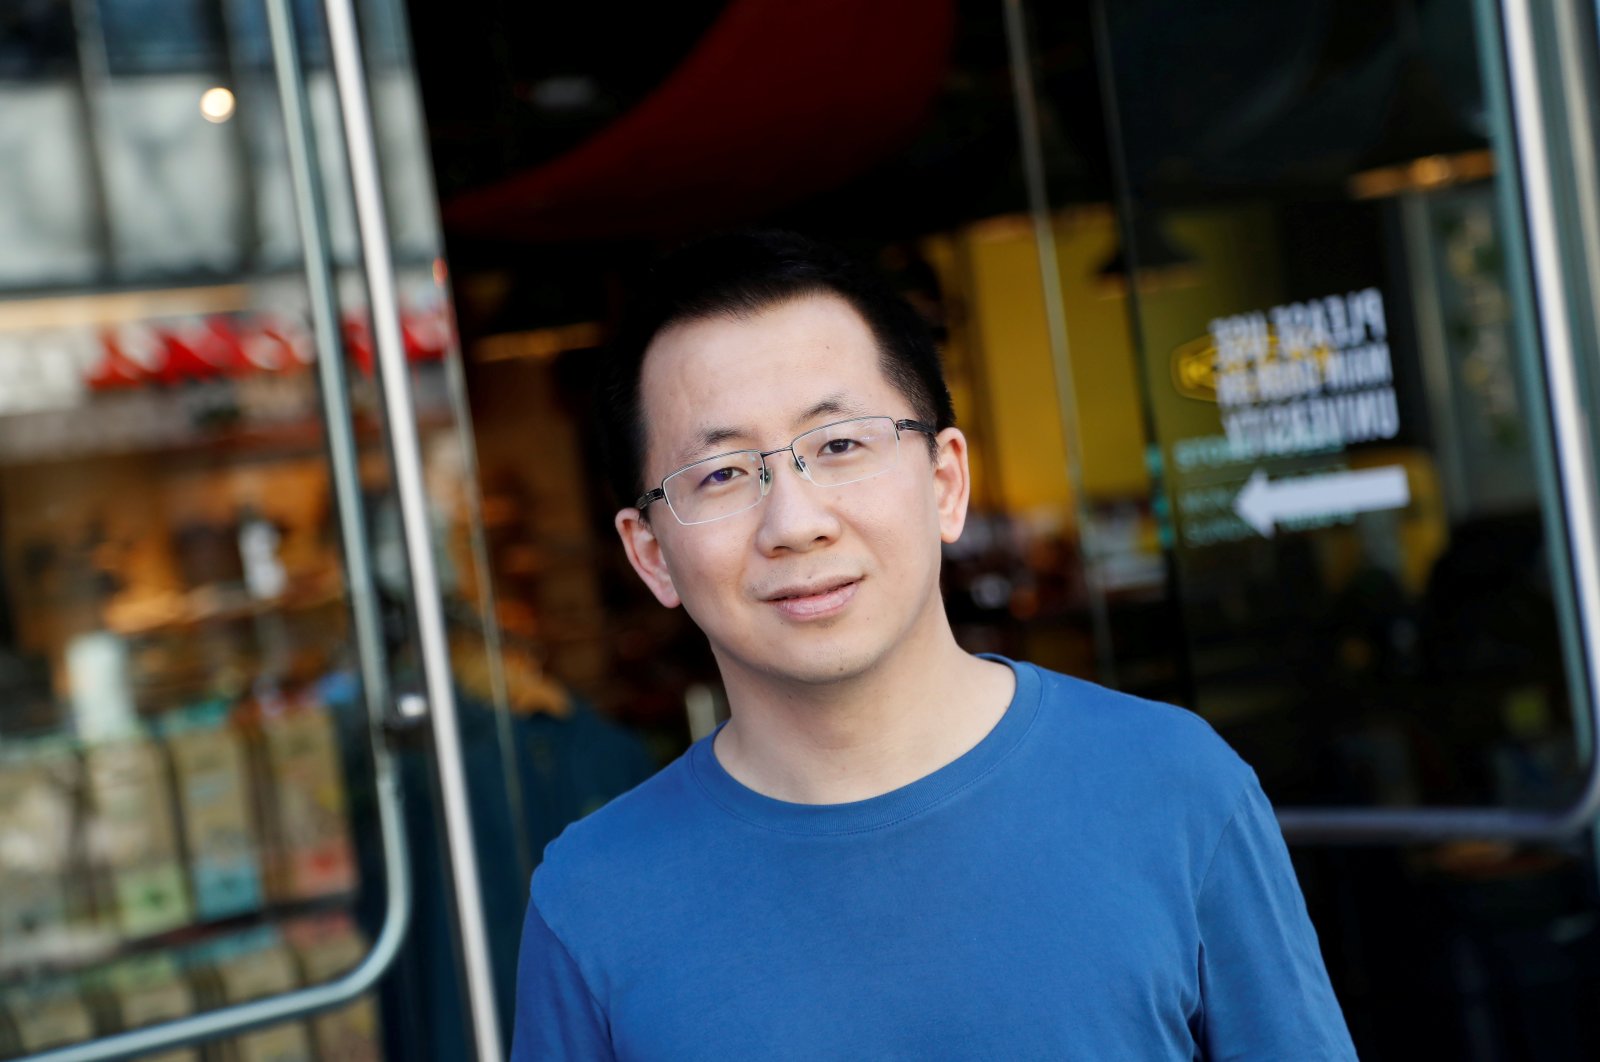 Zhang Yiming, founder and global CEO of ByteDance, poses in Palo Alto, California, U.S., March 4, 2020. (Reuters Photo)